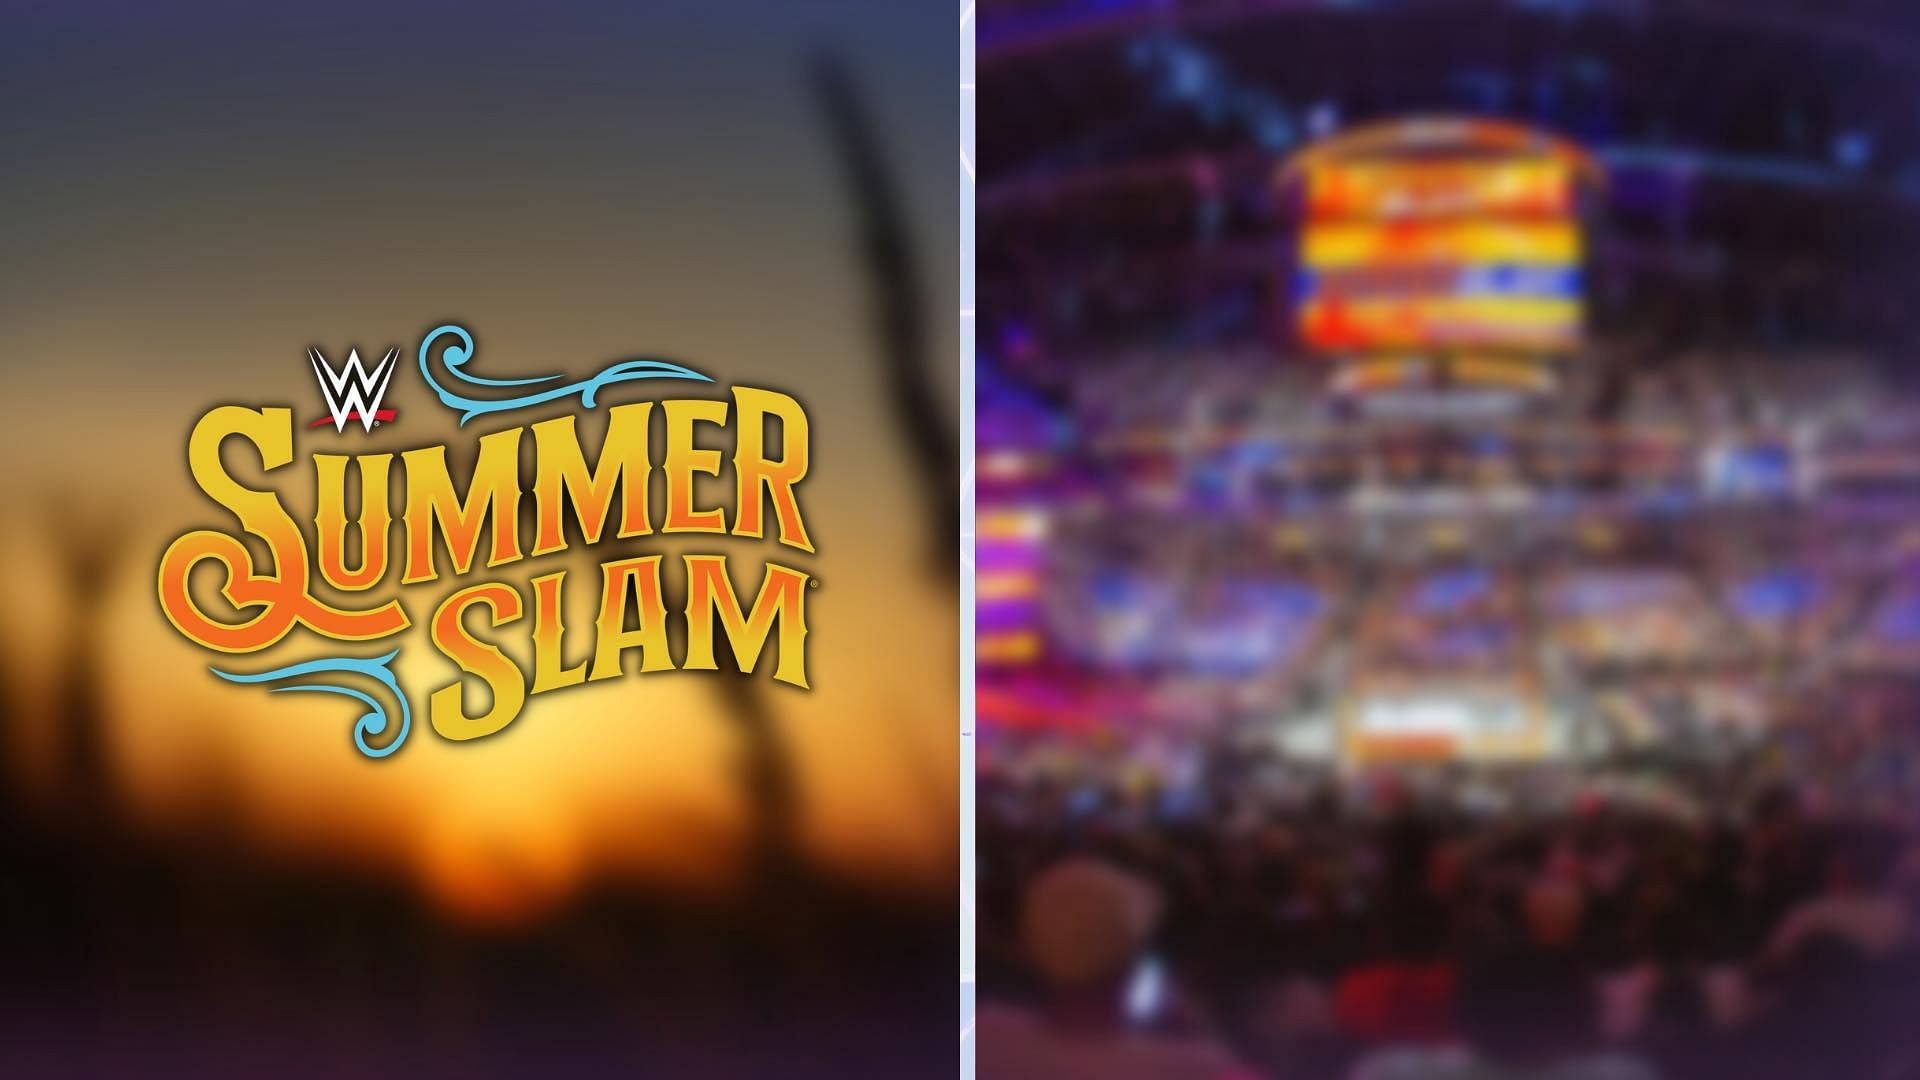 WWE SummerSlam is one of the company